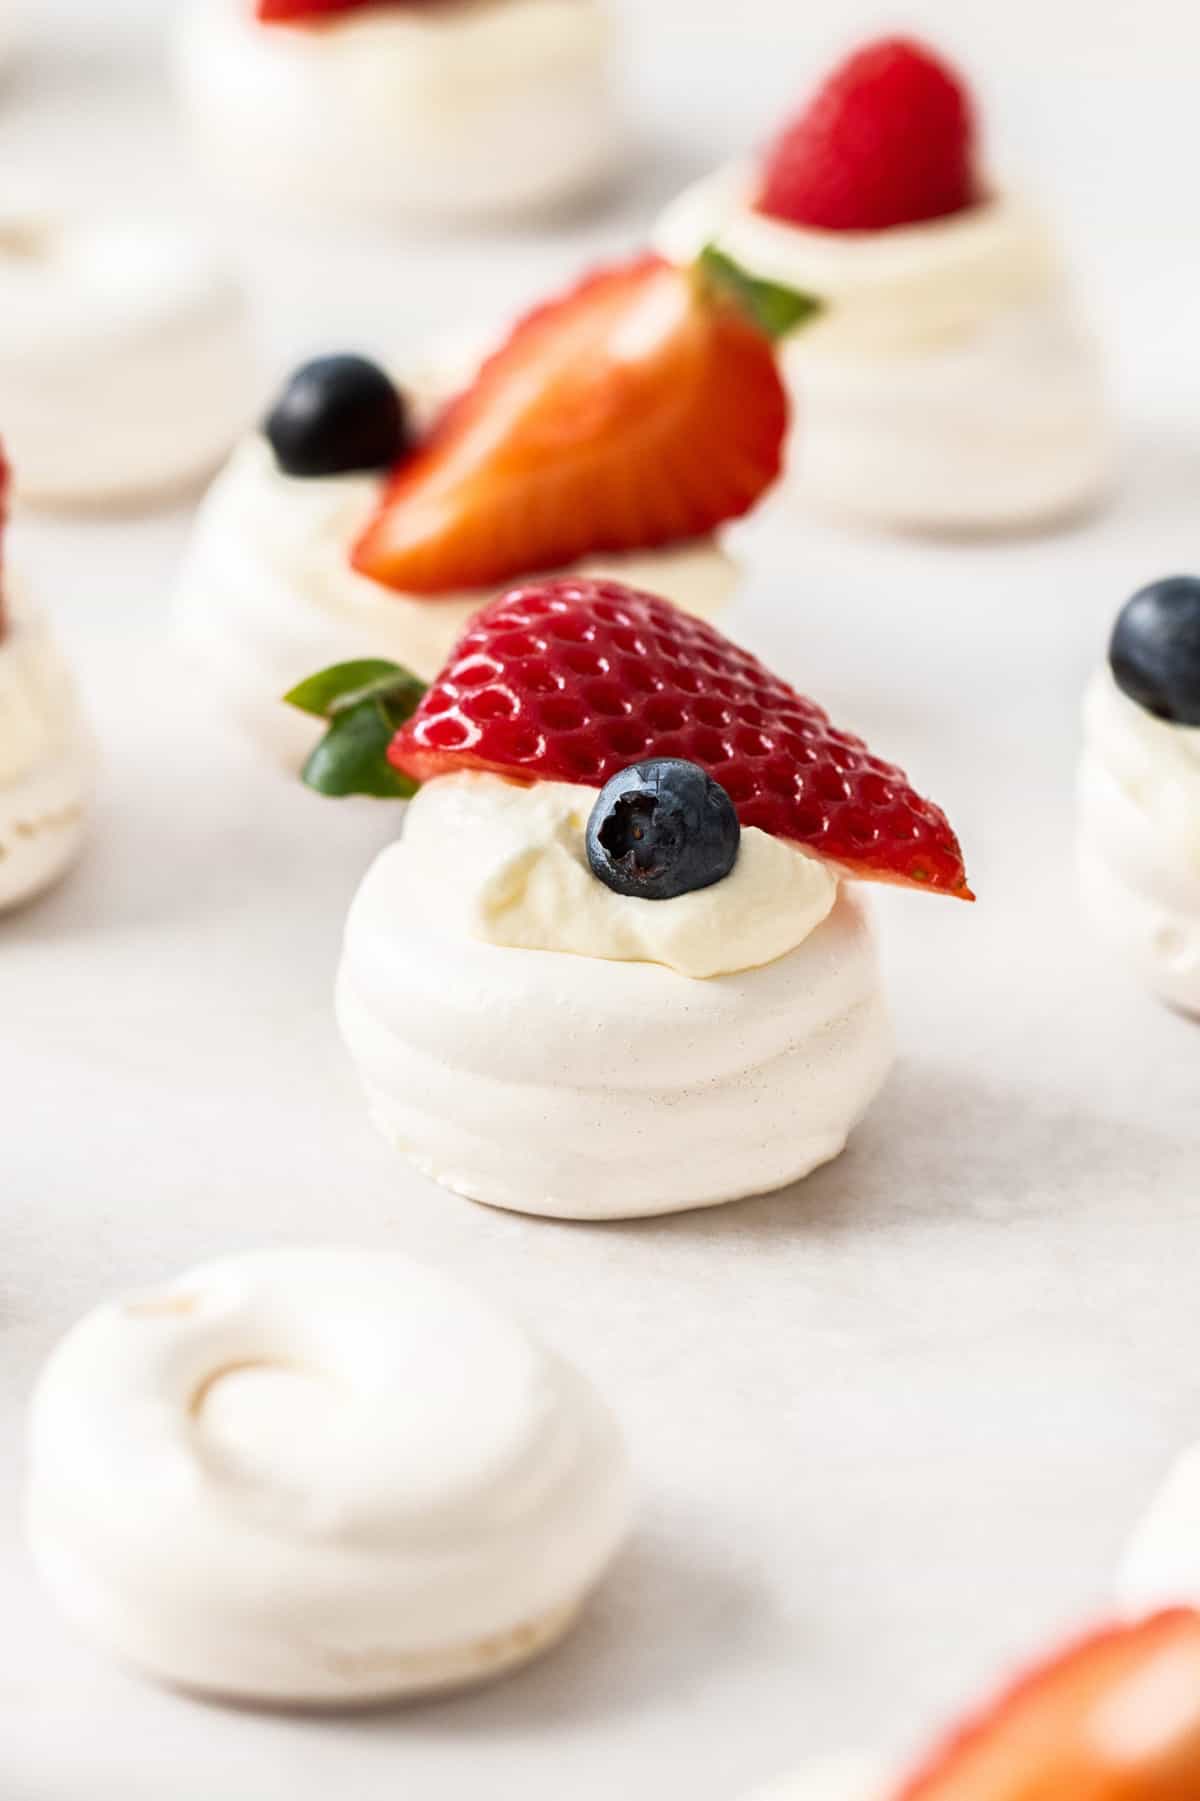 Mini meringue nests, with some cream and fresh berries, sitting on a tray.